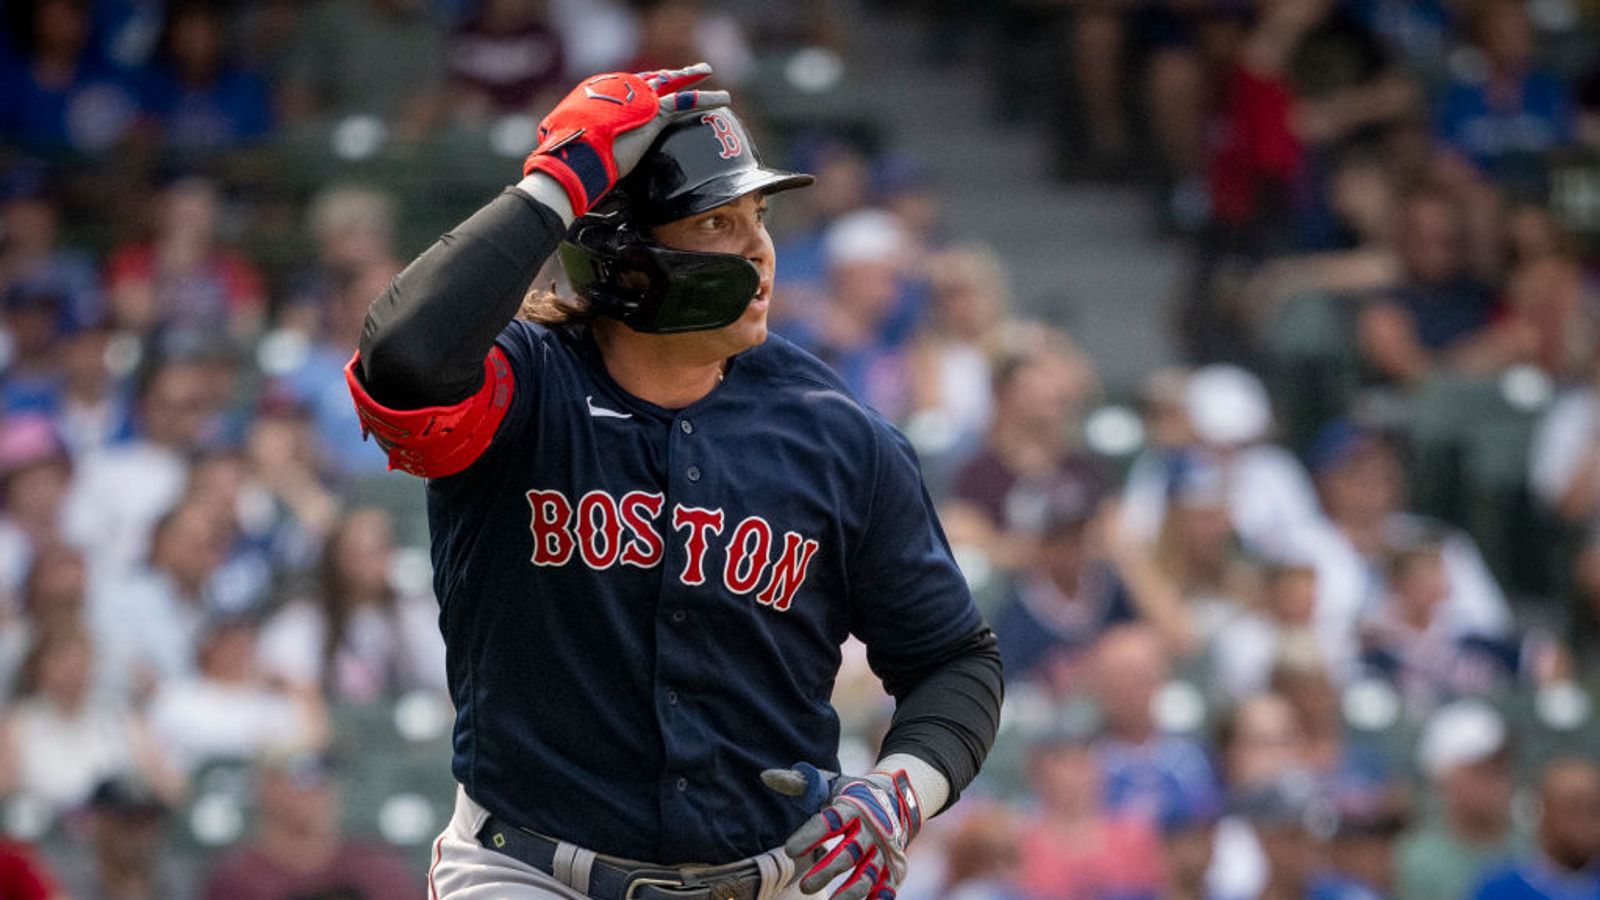 BSJ Live Coverage Red Sox (55-47) at Giants (56-47)